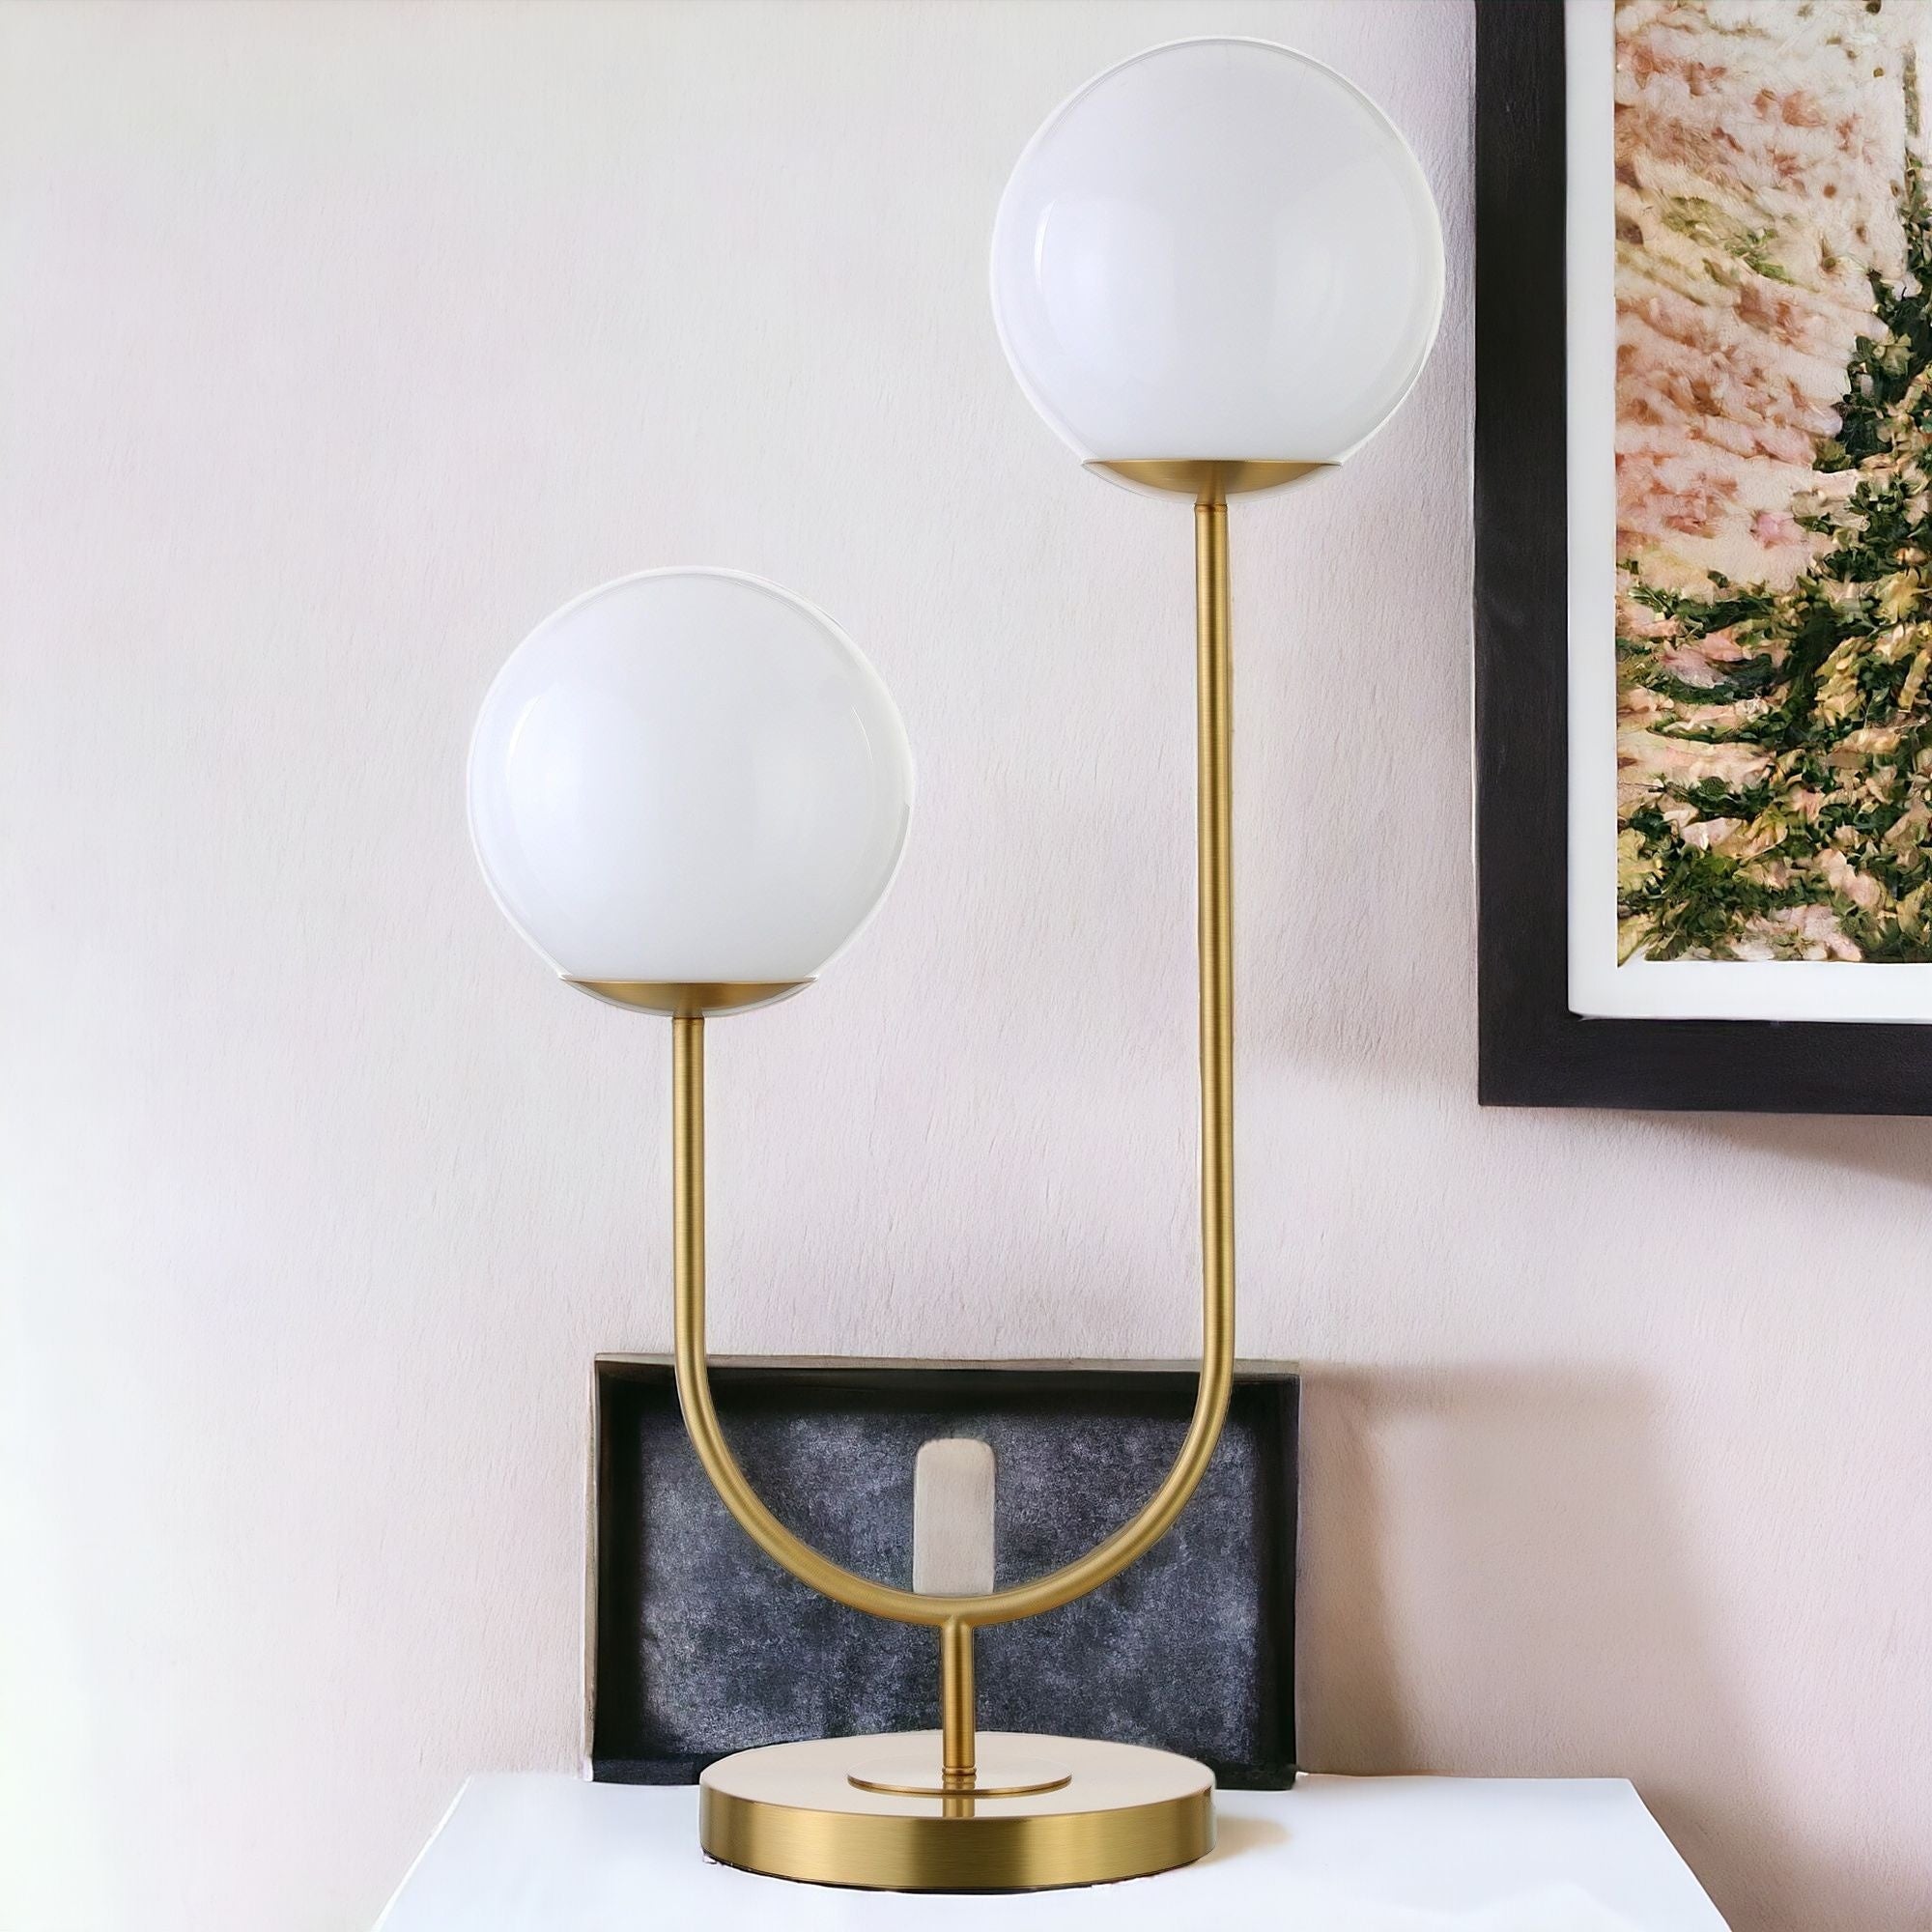 28" Gold Metal Two Light Novelty Globe Table Lamp With White Globe Shade